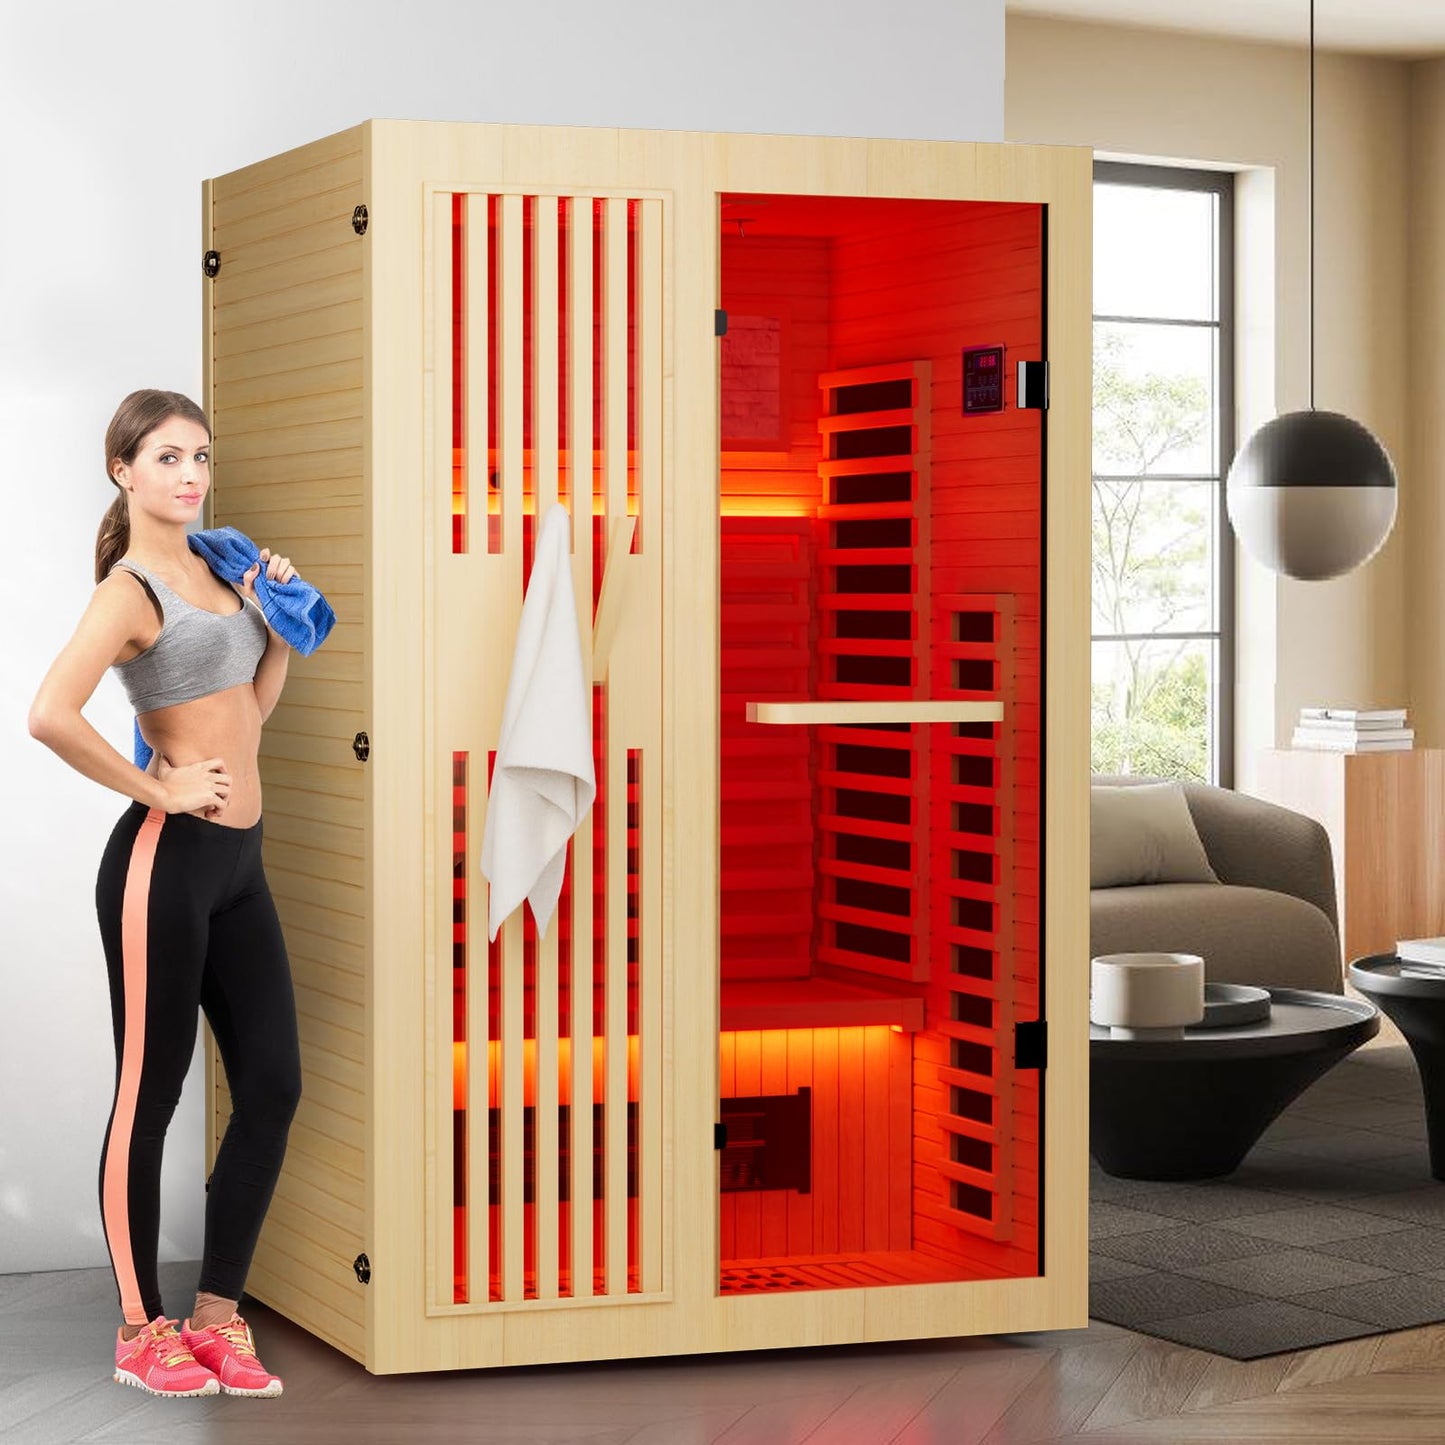 SAUNAERA Full Spectrum Sauna for Home,1~2 Person Indoor Sauna Room with 10 Minutes Warm-up Heate,Low EMF,Canadian Hemlock Wood Home Infrared Sauna with Bluetooth. and Tempered Glass